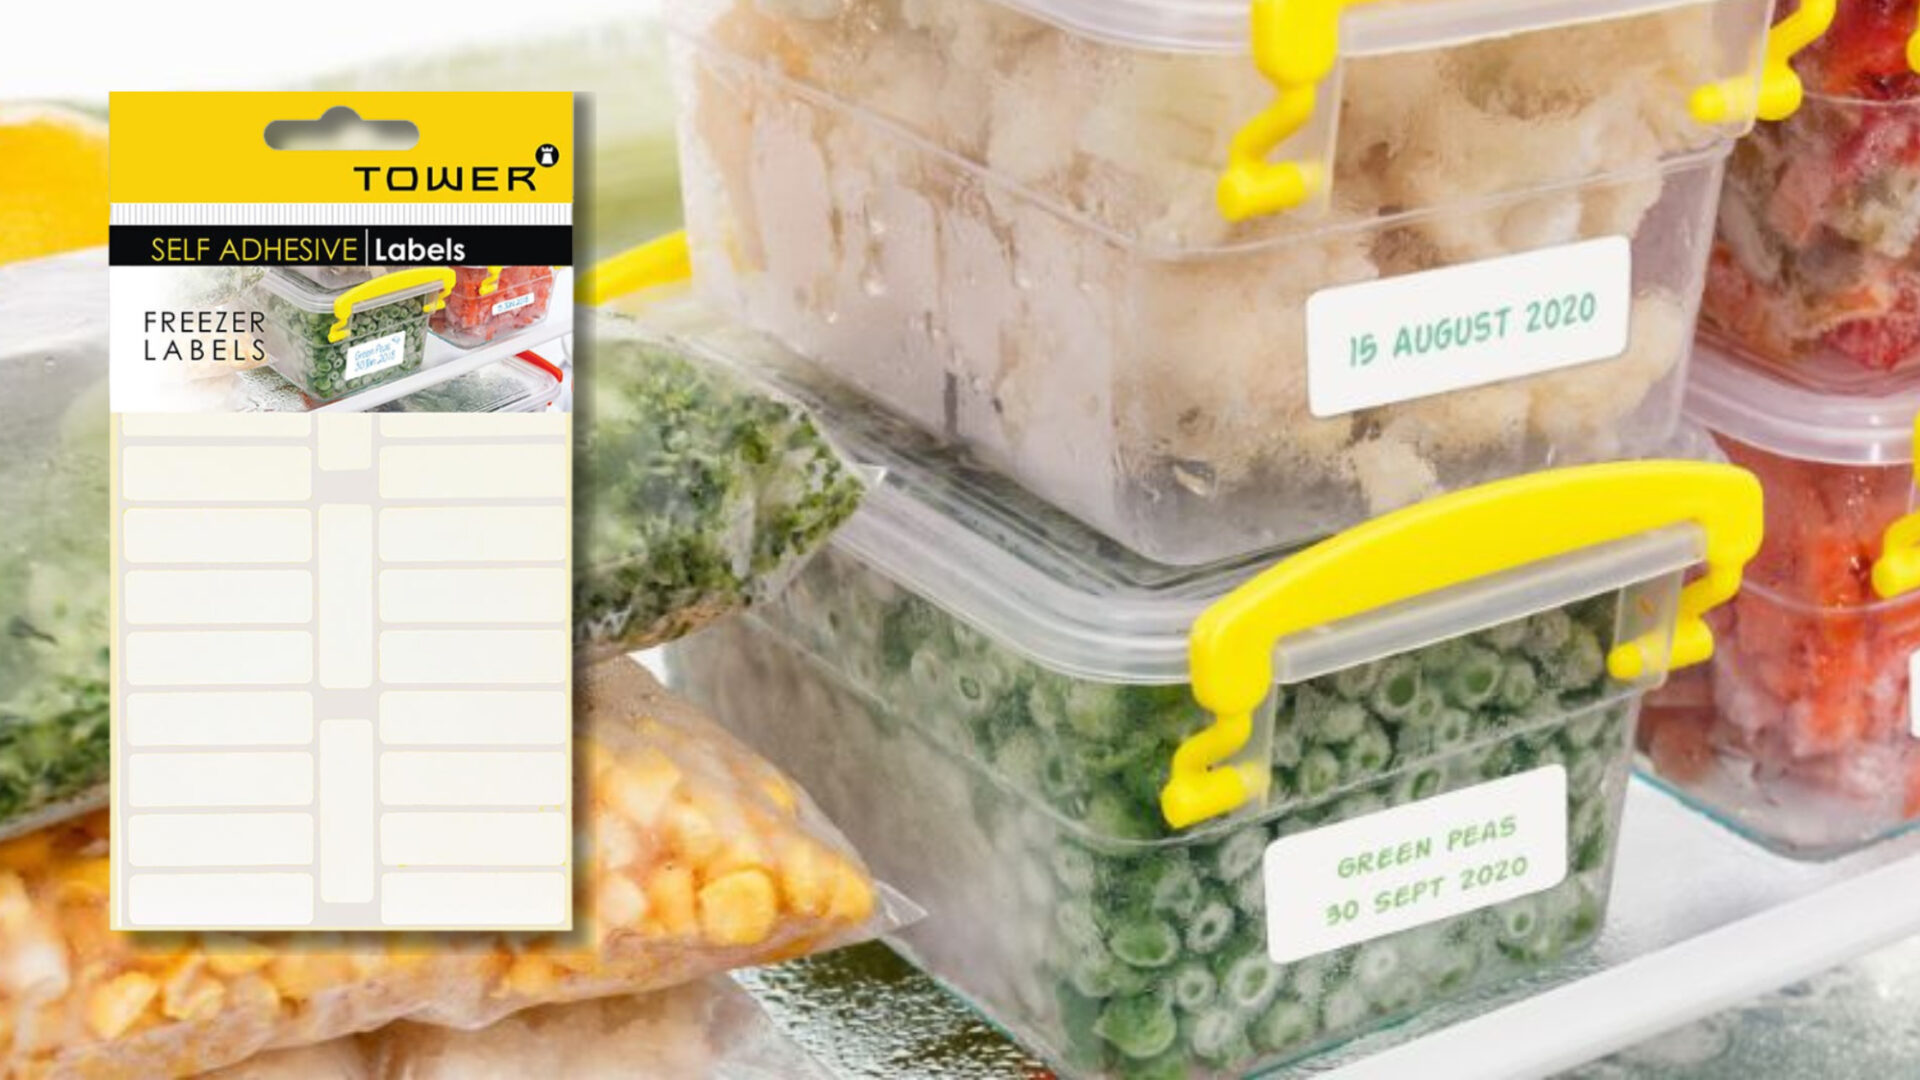 Frozen food labelled with TOWER freezer labels